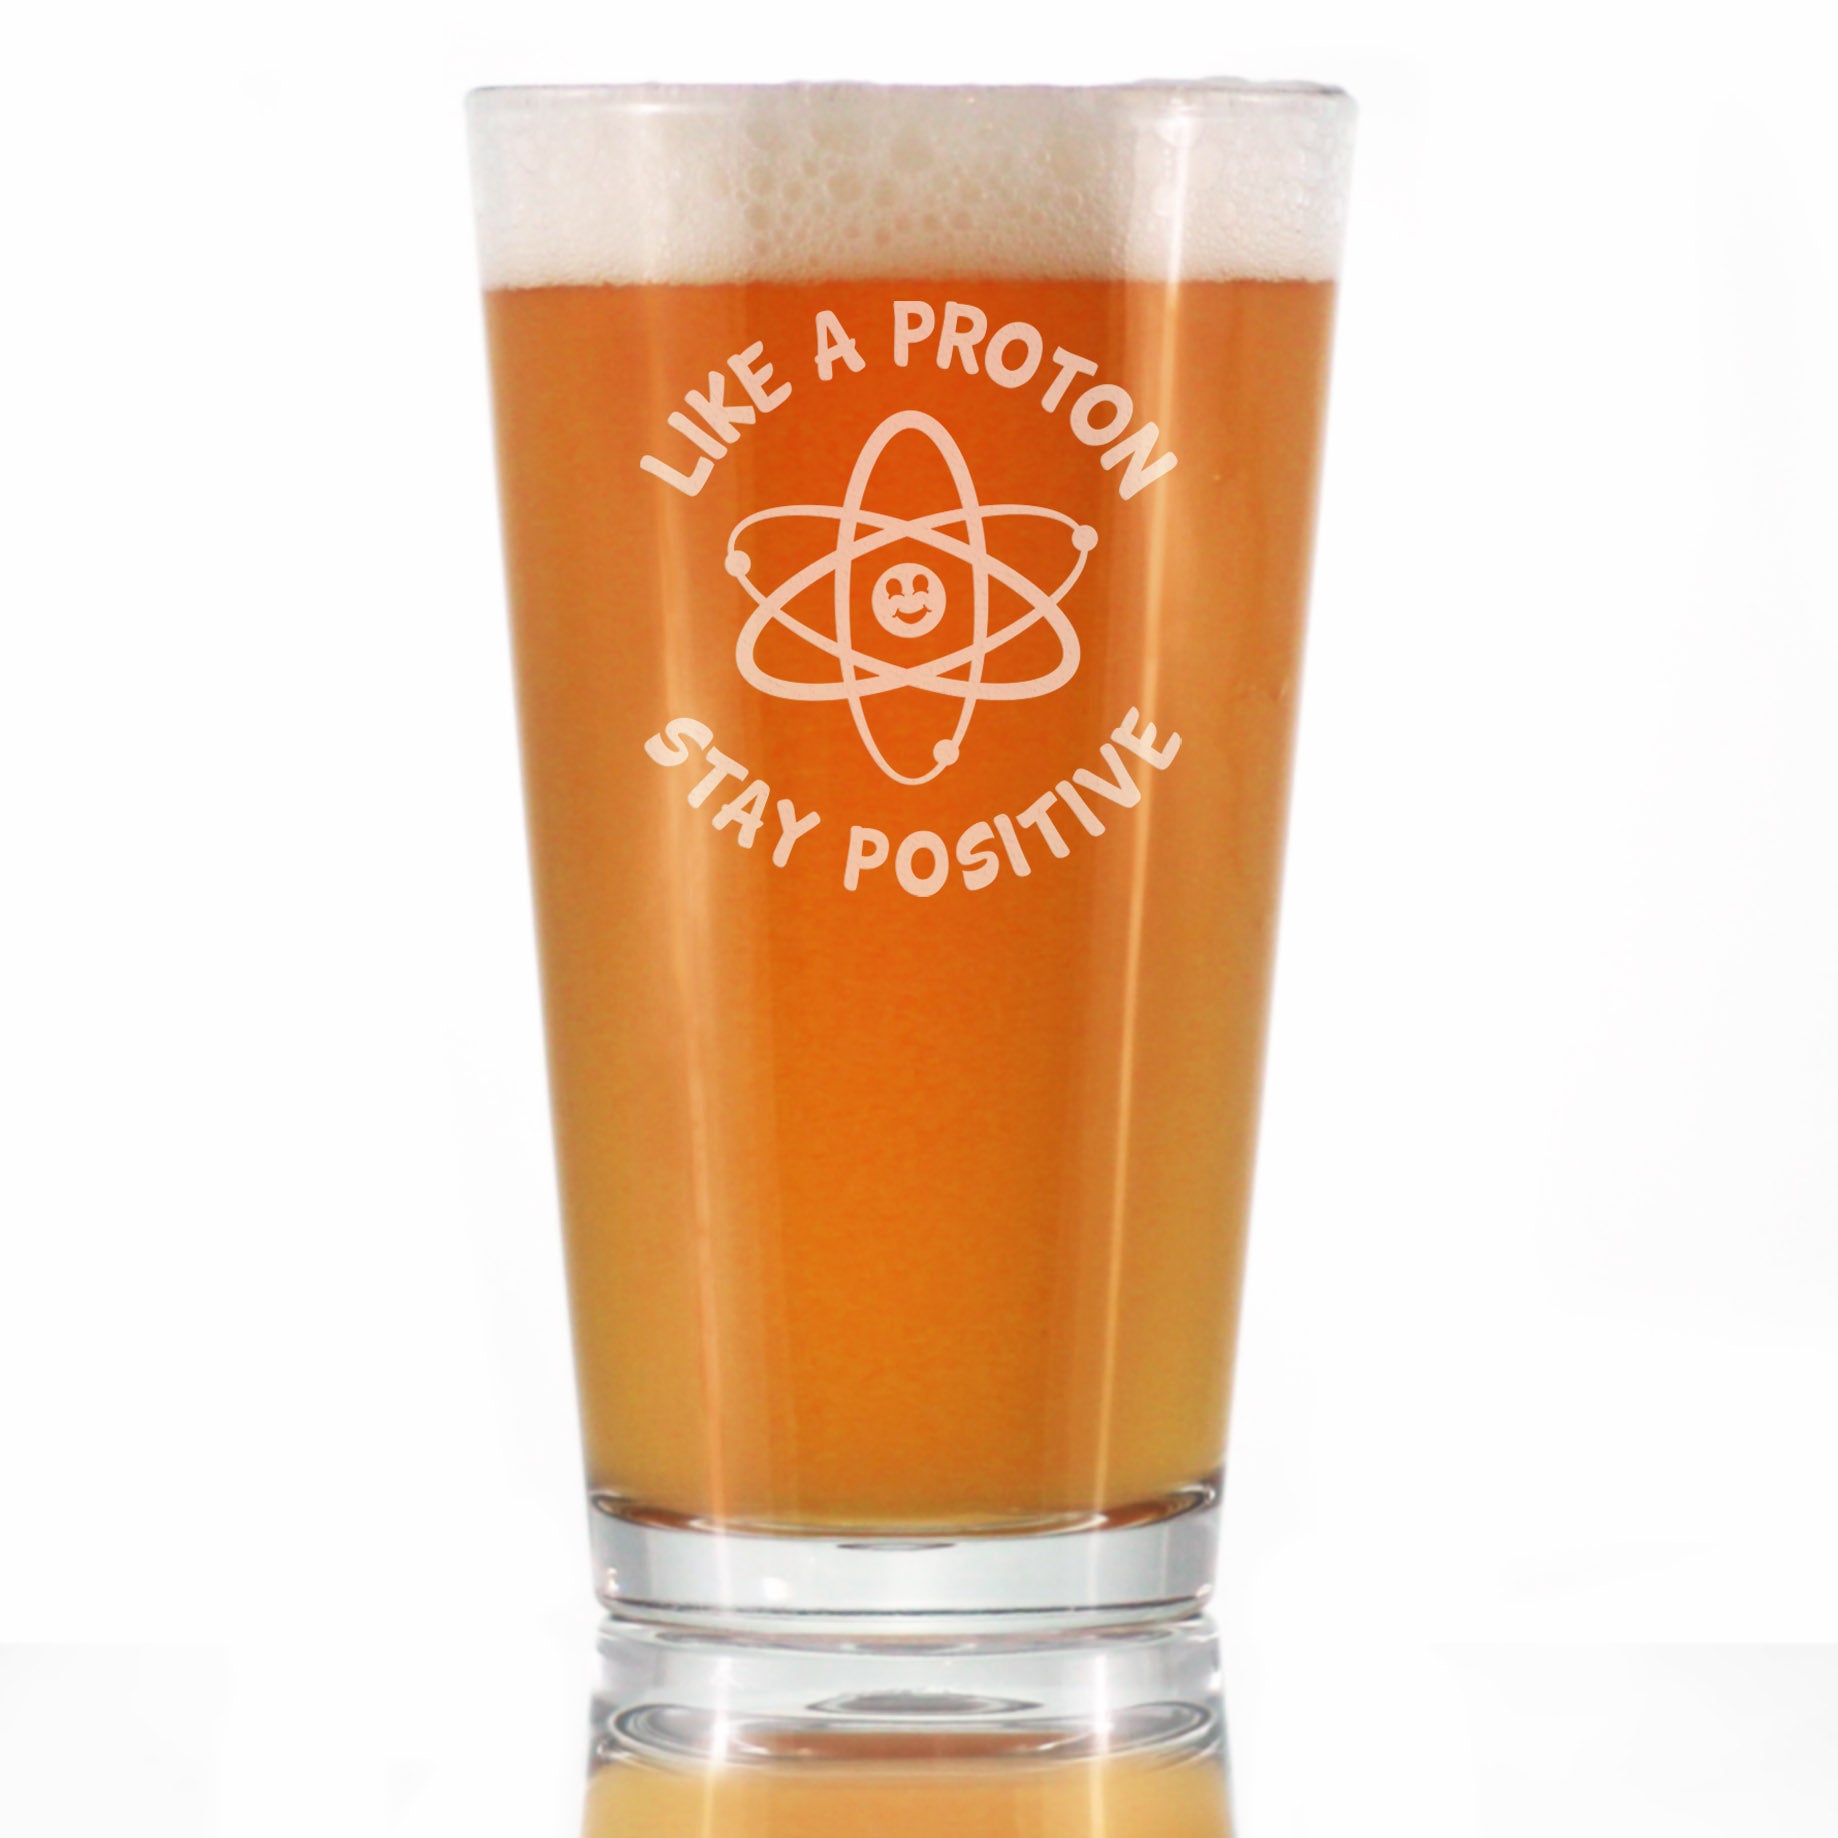 Like A Proton, Stay Positive - Pint Glass for Beer - Funny Science Teacher Gifts for Women & Men - 16 oz Glasses